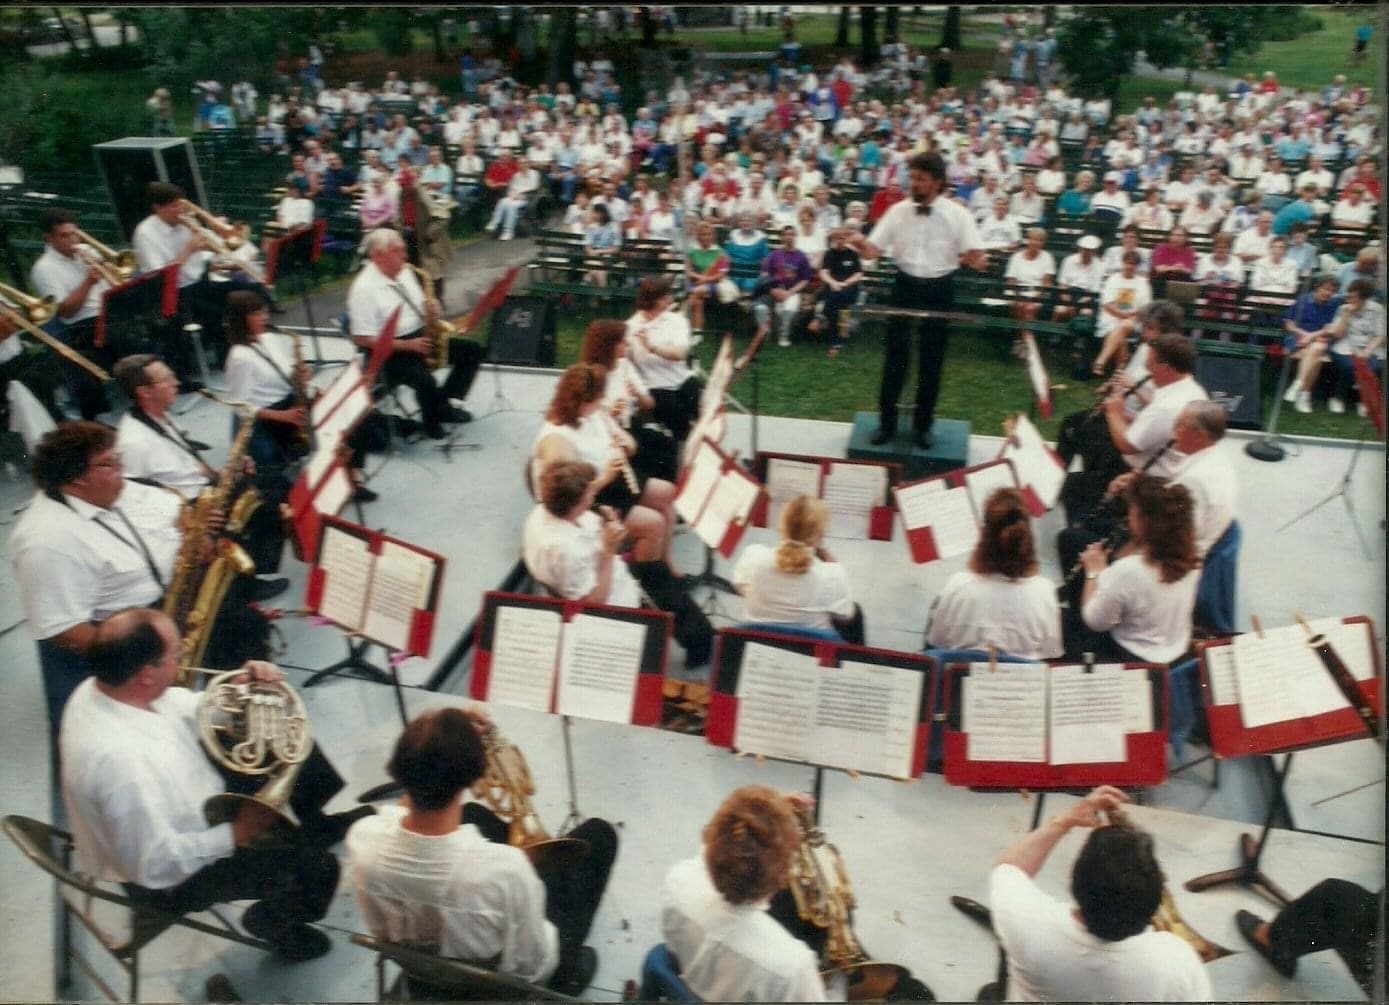 A view from the back row of the band showing a full audience in the park listening to the band play.